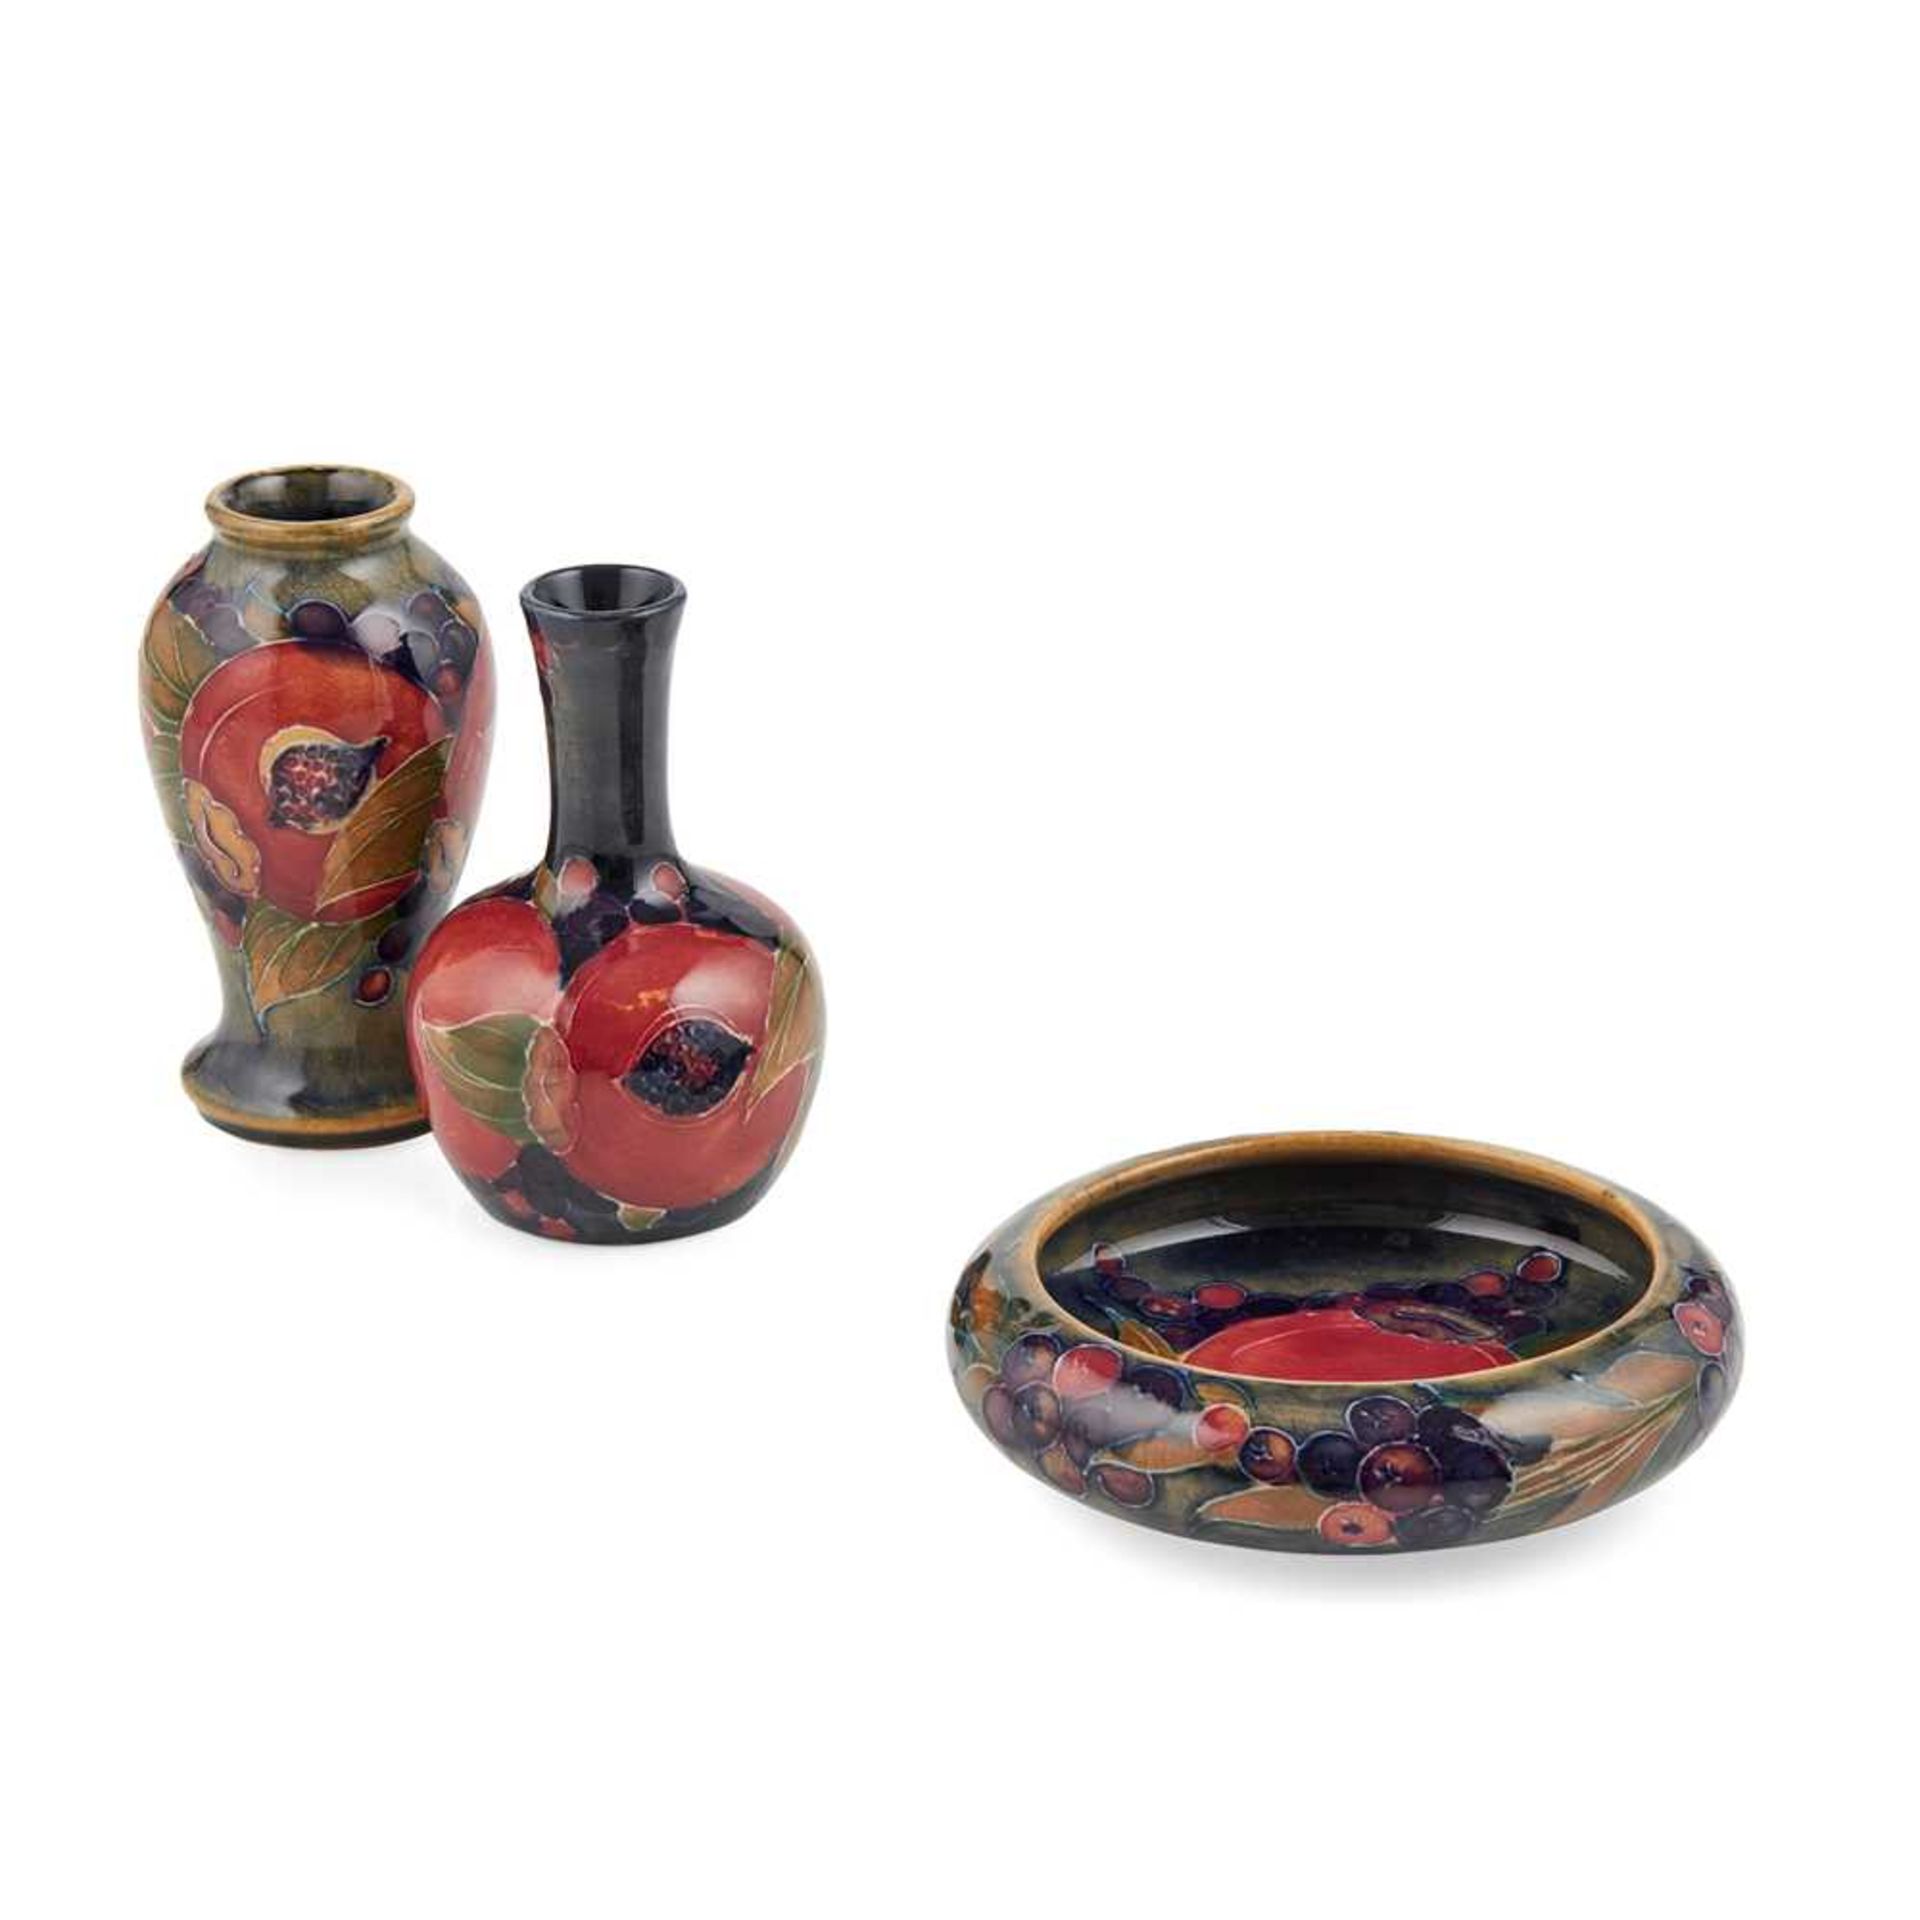 WILLIAM MOORCROFT (1872-1945) FOR MOORCROFT POTTERY TWO MINIATURE ‘POMEGRANATE’ PATTERN VASES, CIRCA